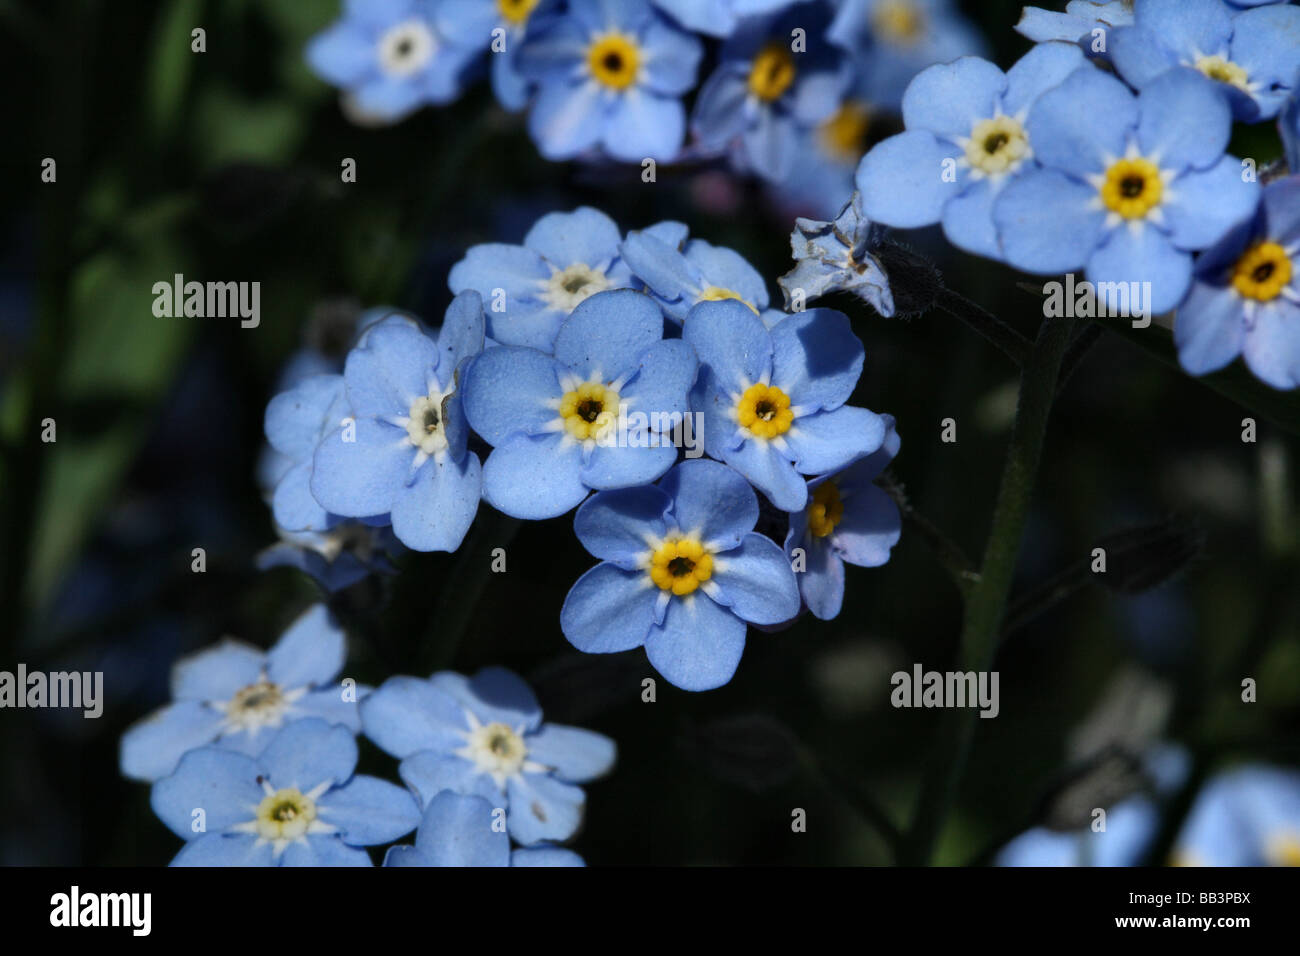 Forget Me Not , Myositis spp Family Boraginaceae Close Up or Macro Shot of Flower Blooms Stock Photo